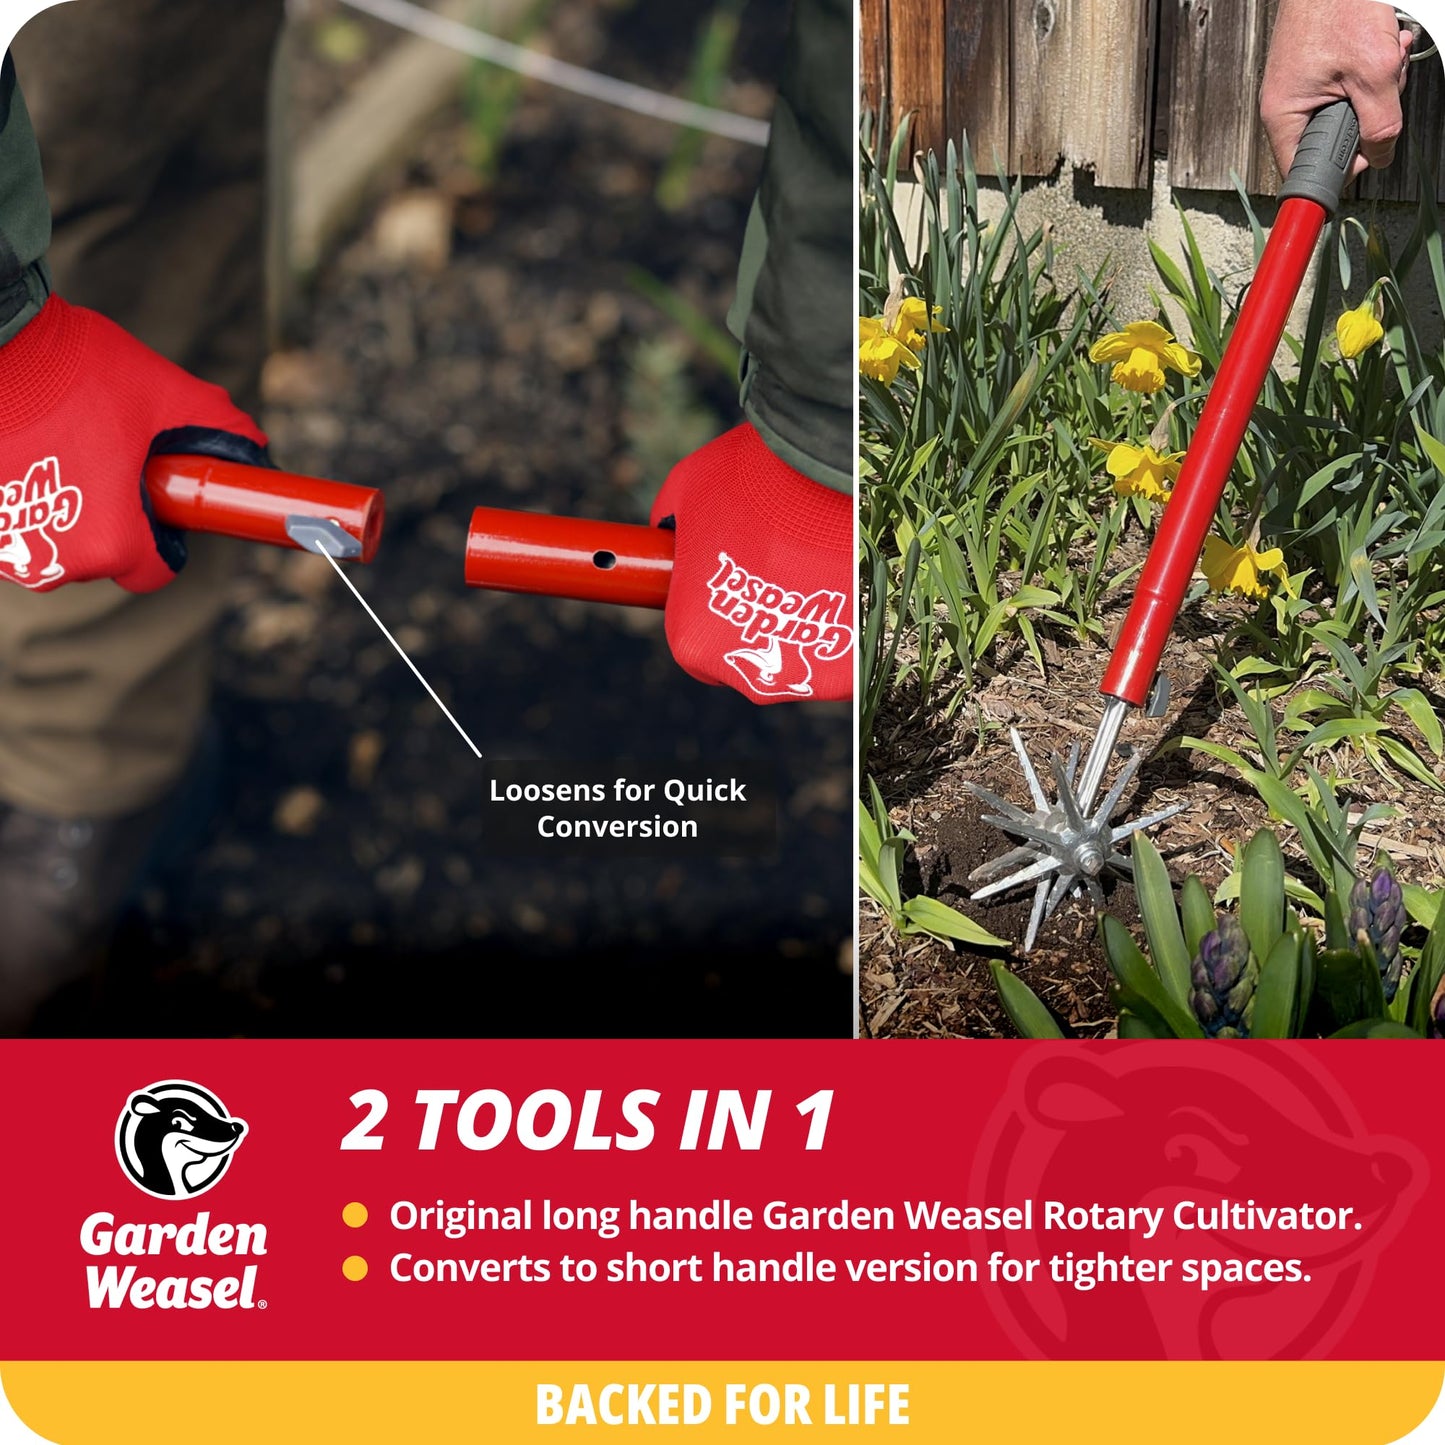 Garden Weasel Rotary Cultivator & Hand Tiller - 2-in-1 | Aerate, Weed, Cultivate, Plant, Reseed | Lawn Reseeding Garden Tool, Garden Soil Loosener | 91206